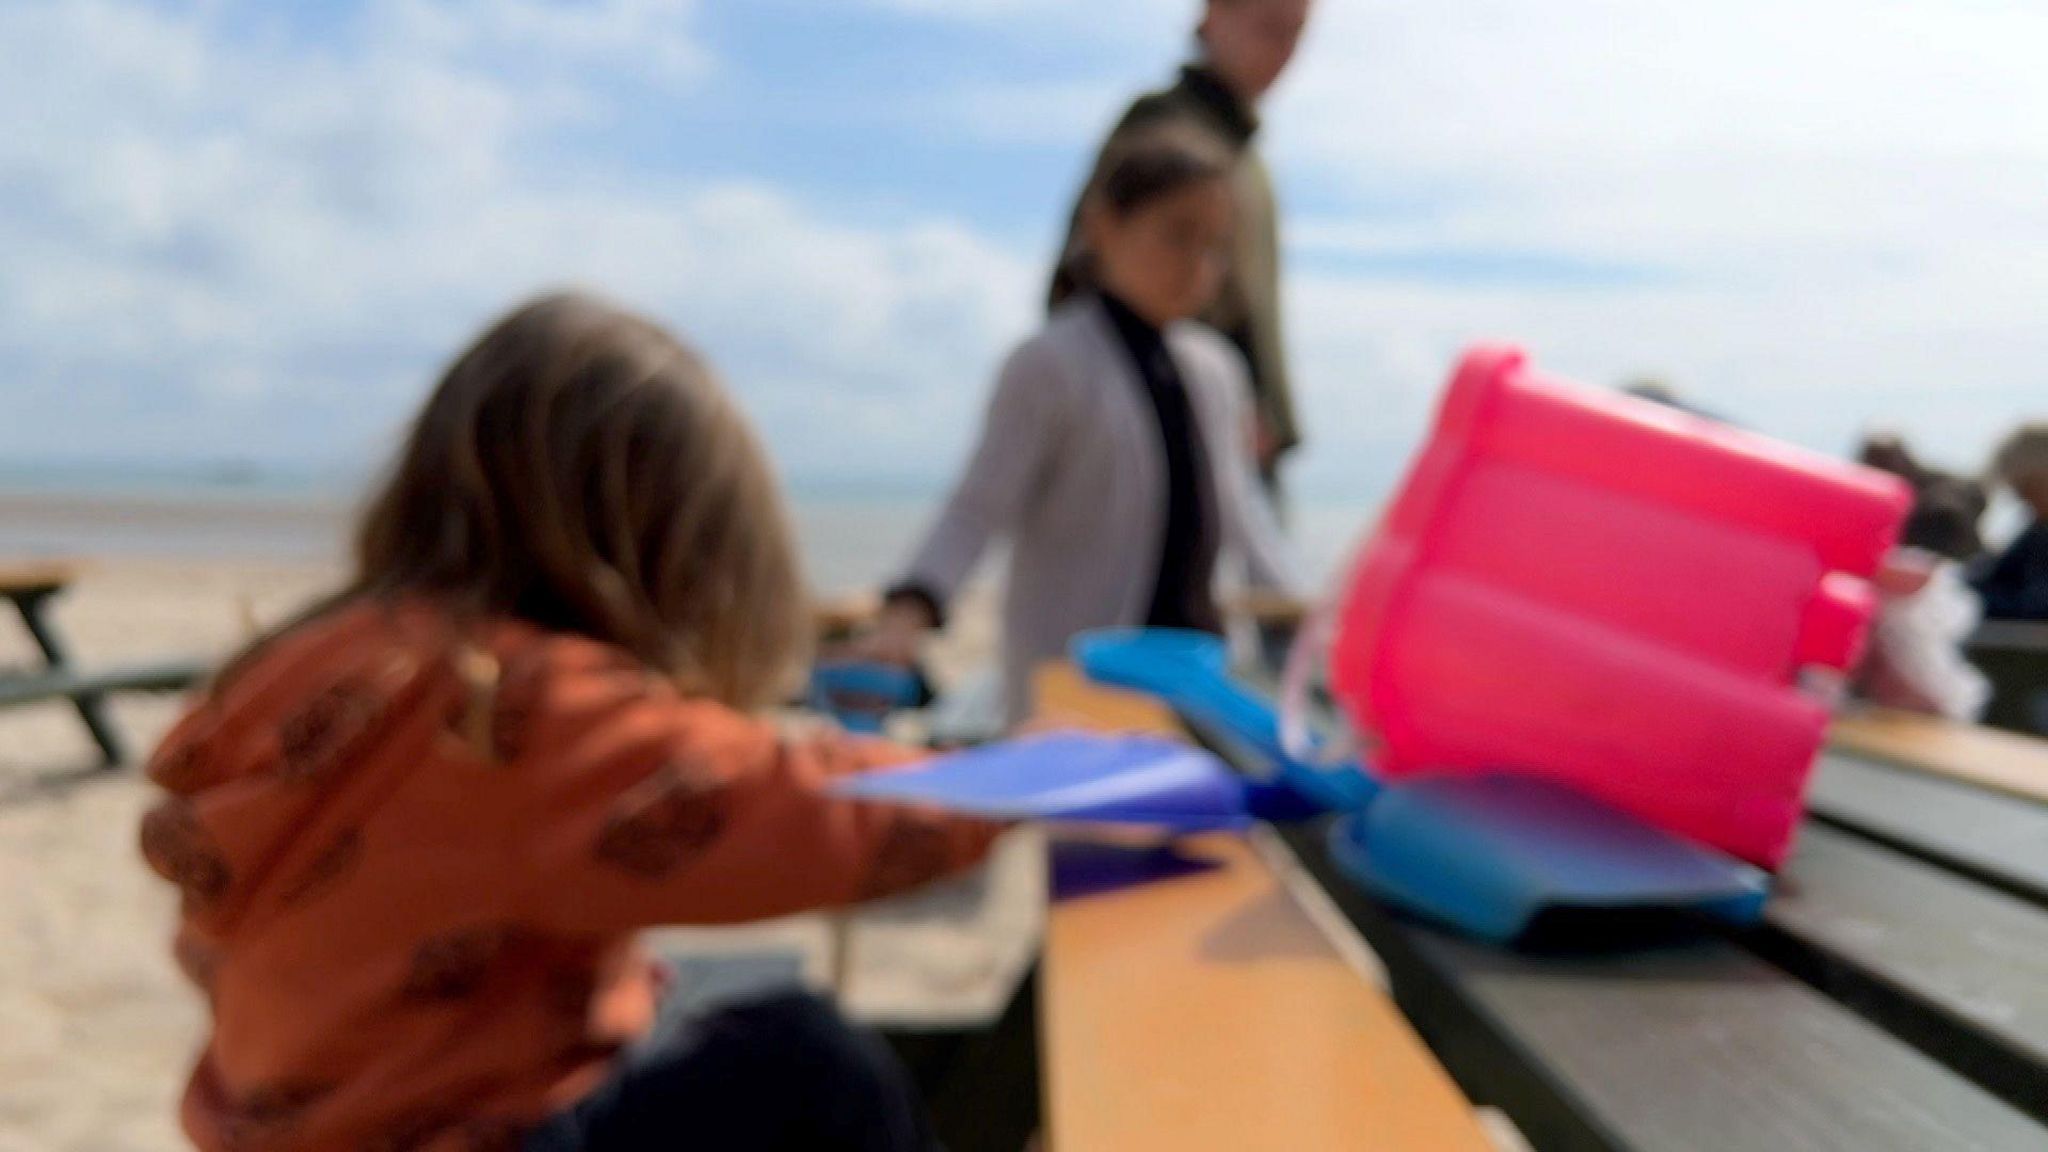 A blurred image of two children by a bench on a beach with their mother